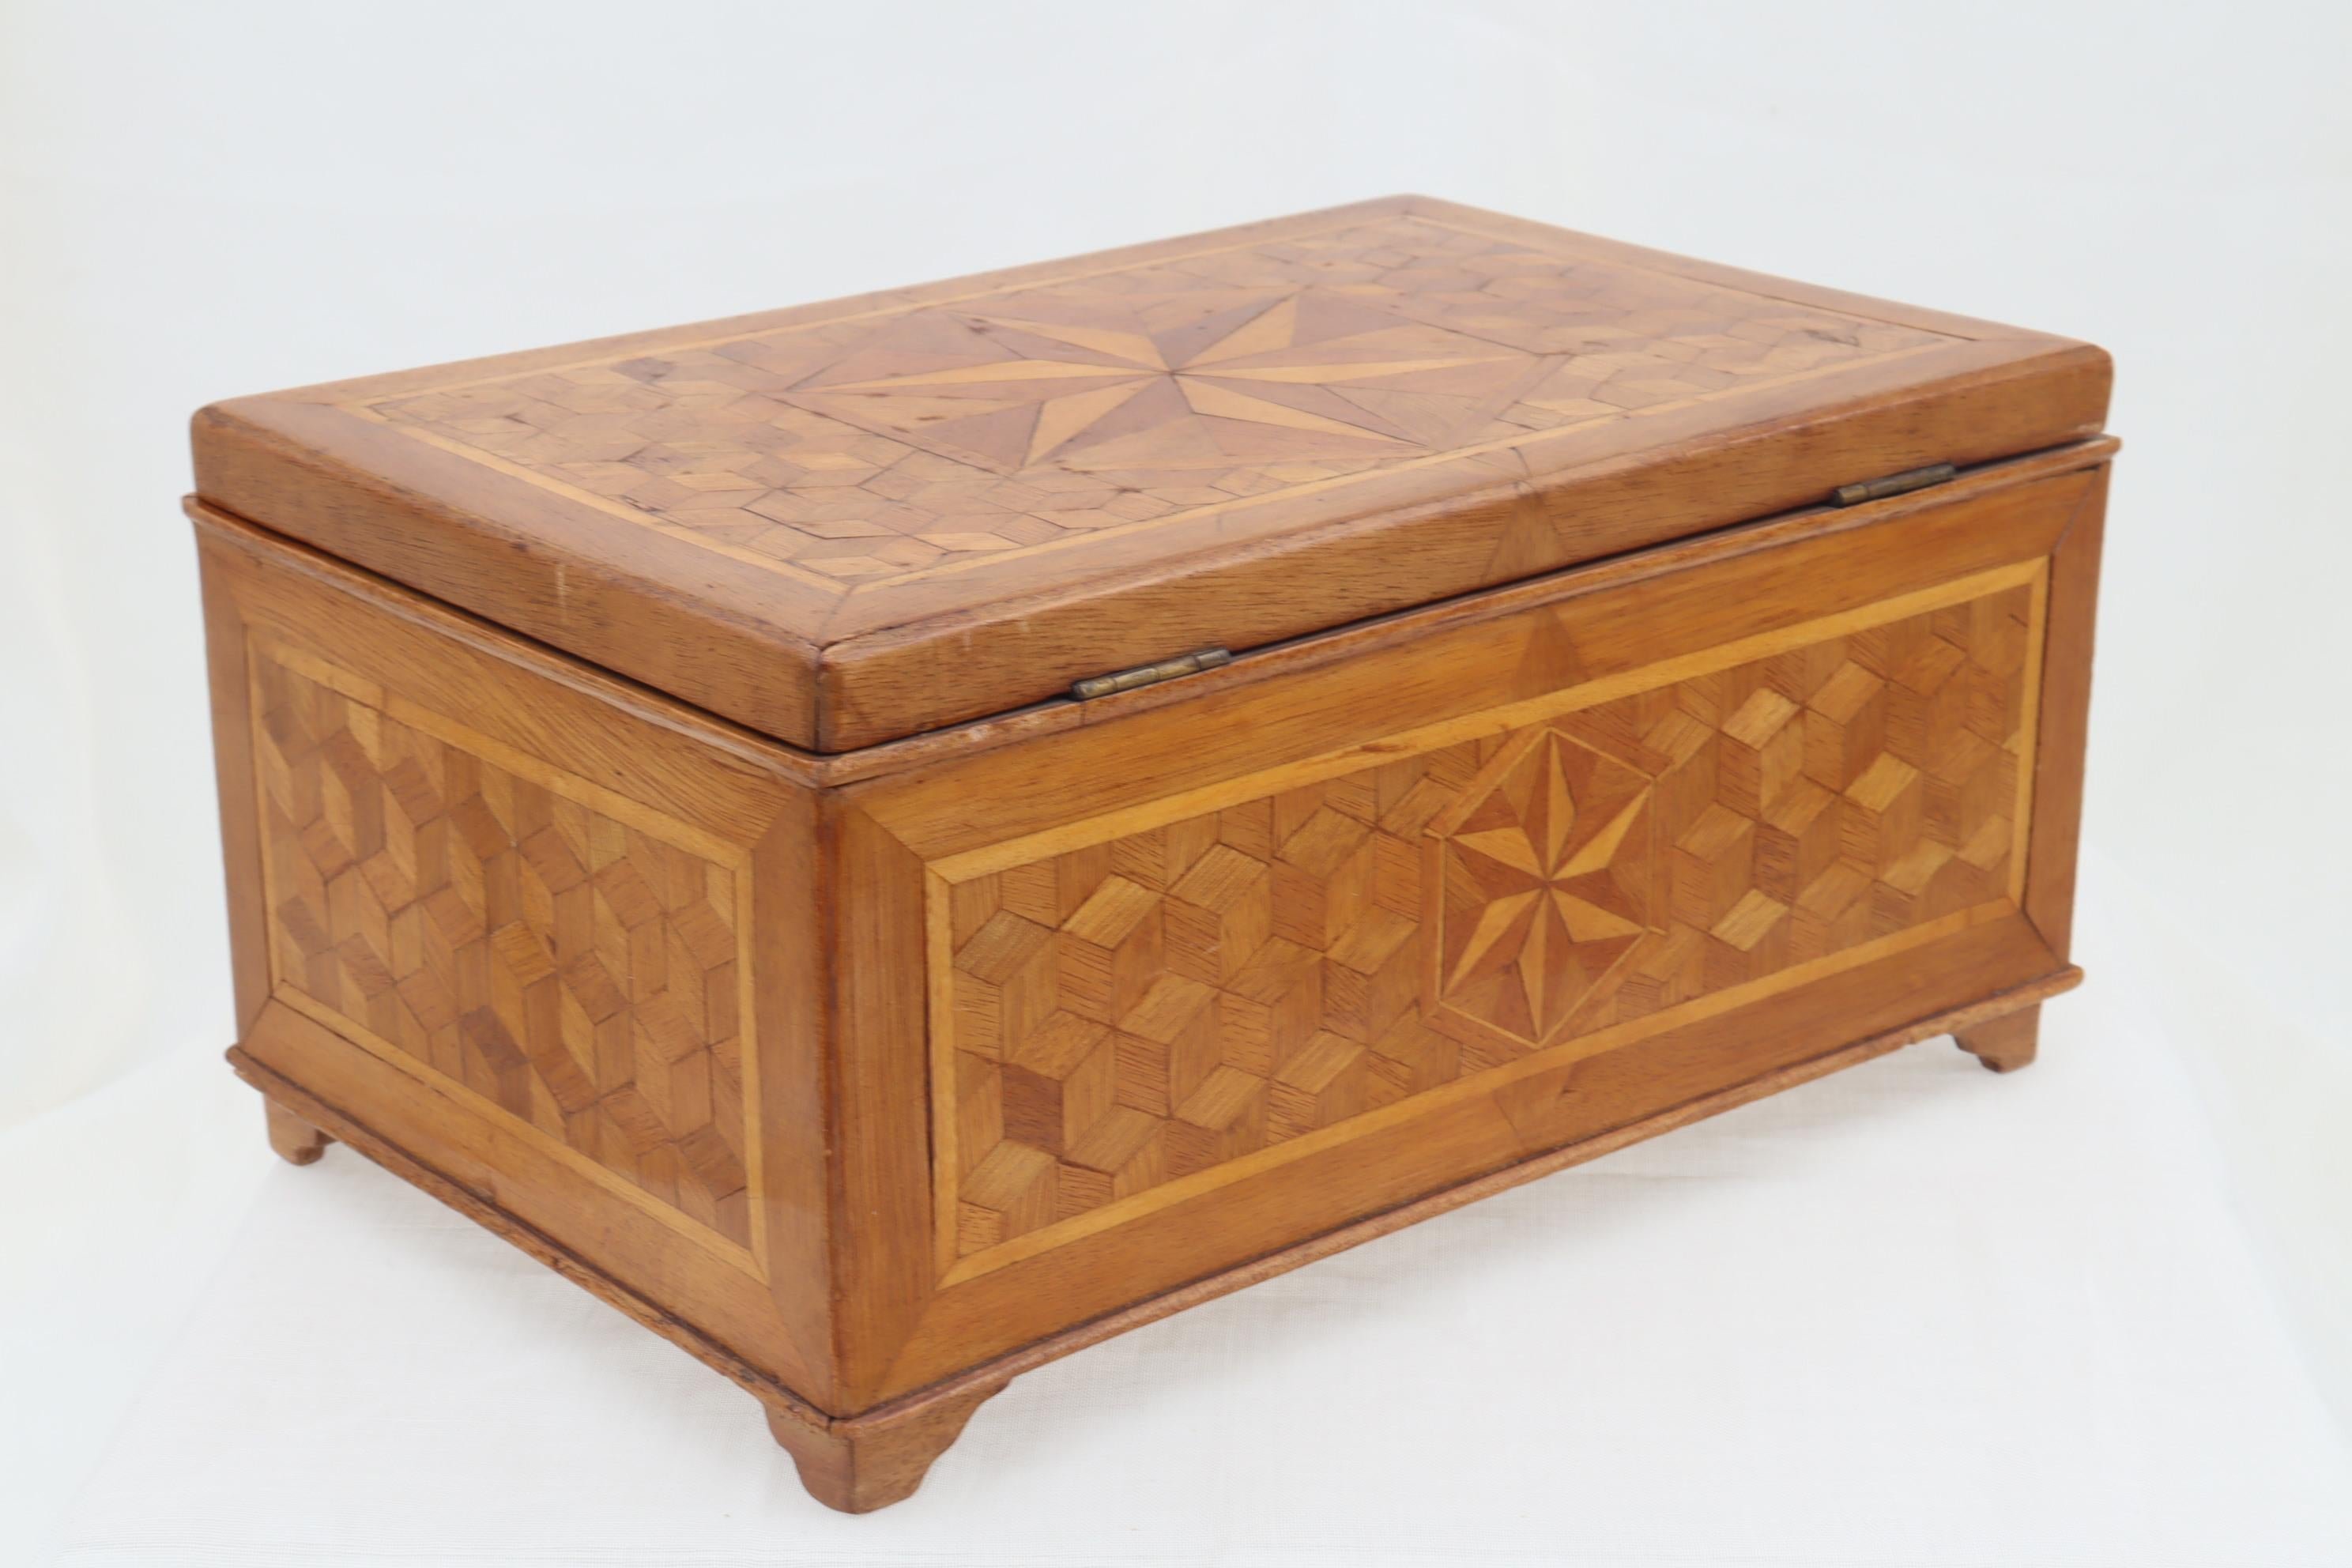 This well made wooden box was made in the Harderwijk internment camp in the Netherlands during WW1. All four sides carry a veneer of the tumbling blocks design, while the front, the back and the lid are also adorned with an inlaid rosette. The top